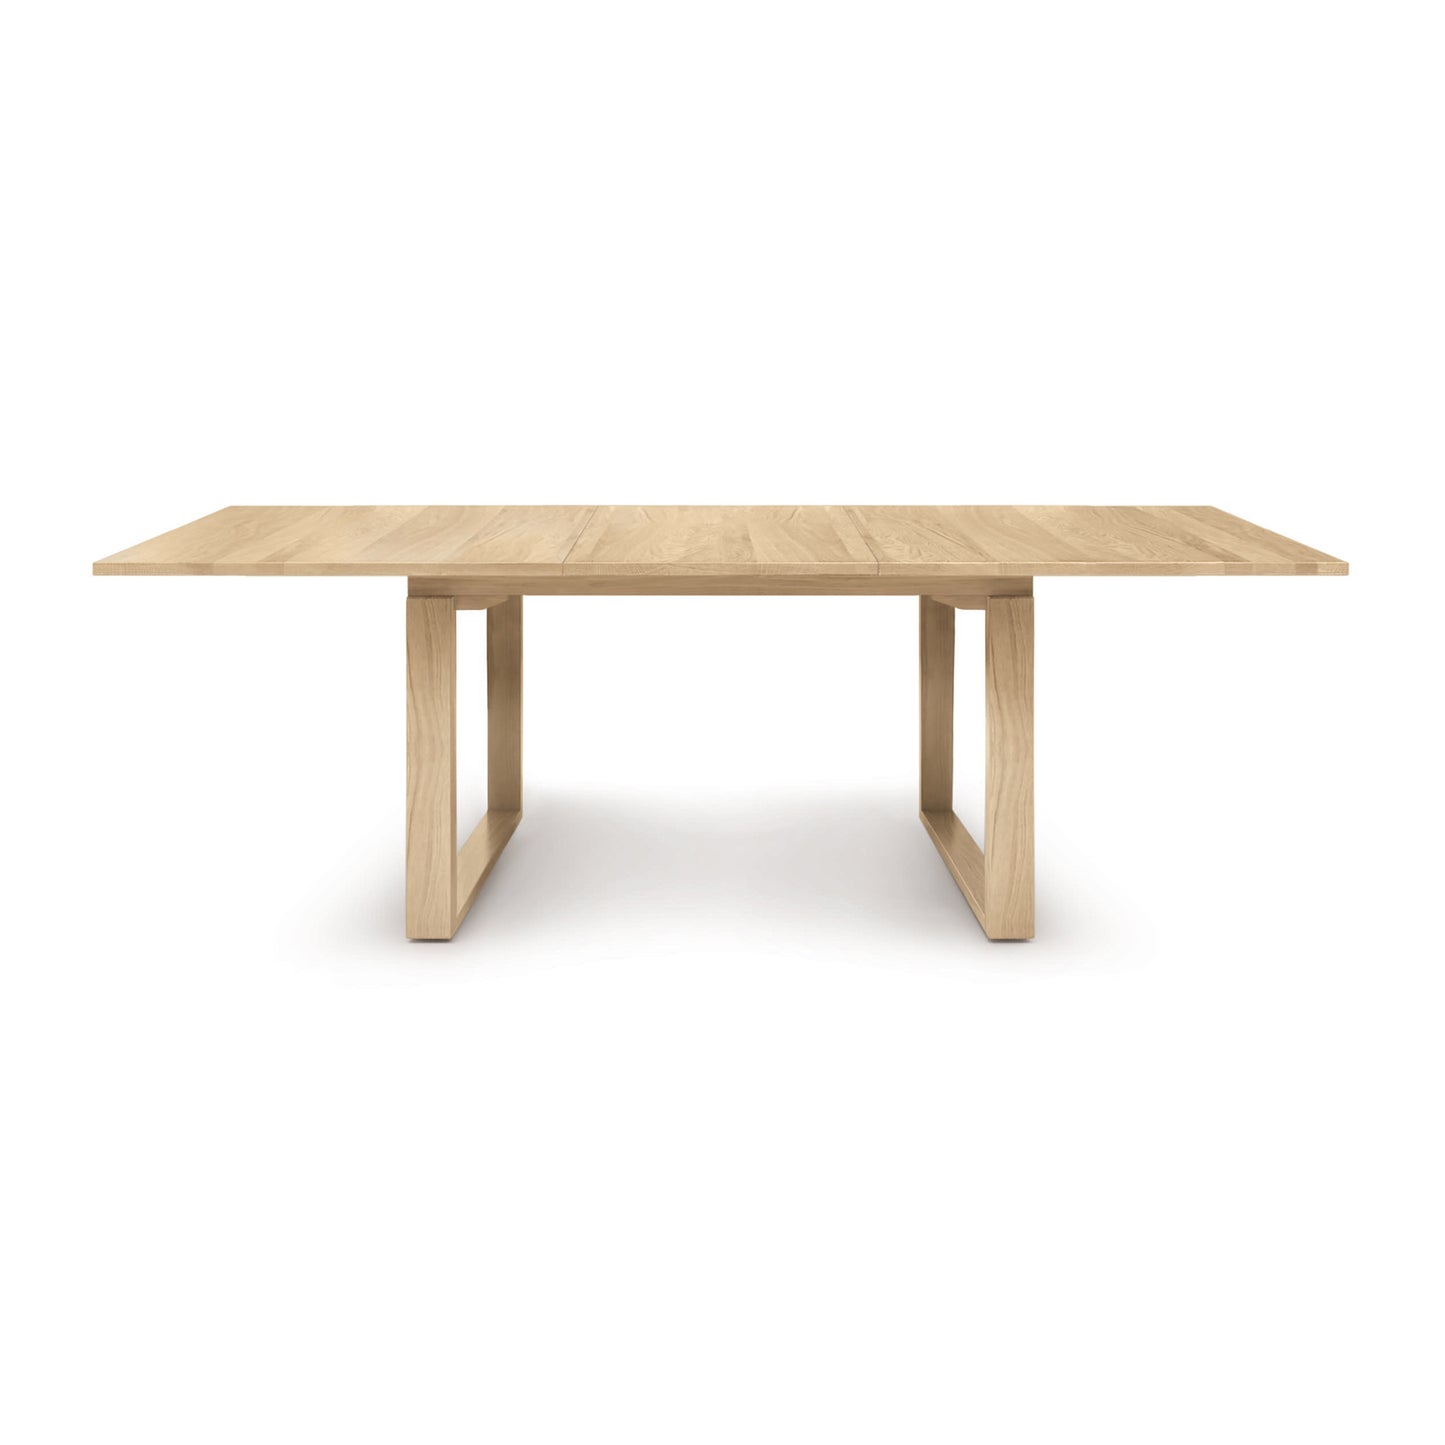 Modern Iso Extension Dining Table from Copeland Furniture on a white background.